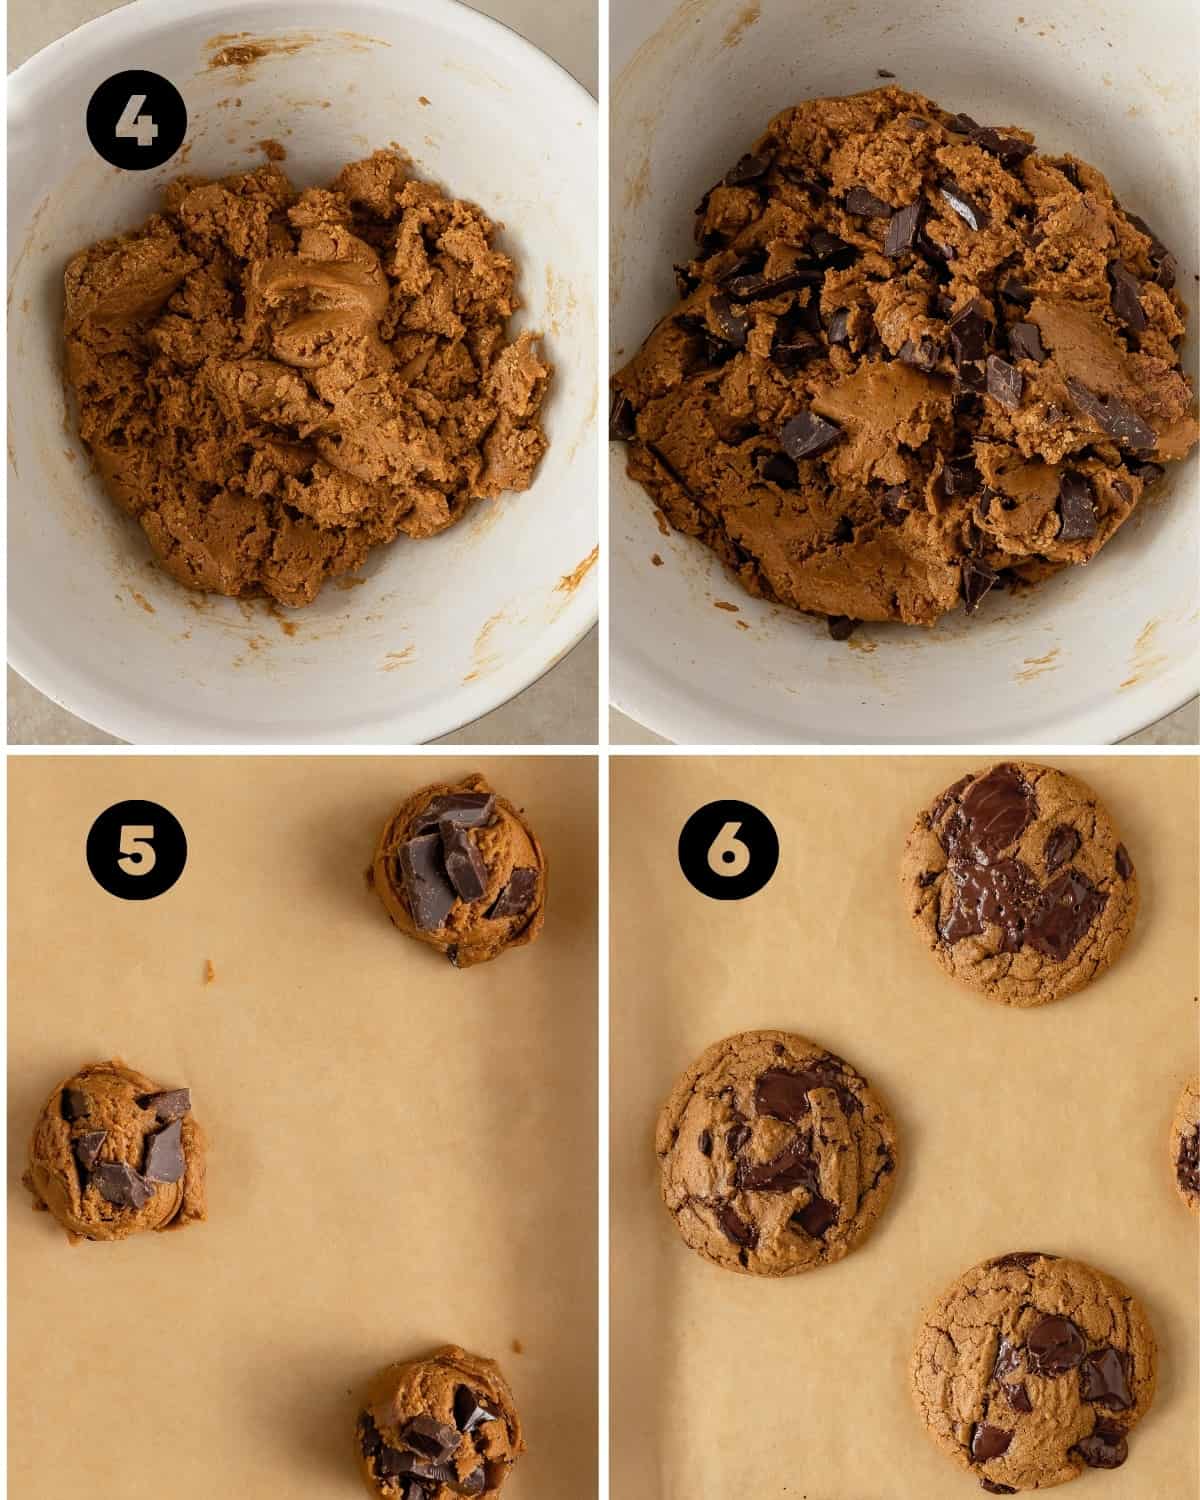 Stir in the dry ingredients to the wet. Fold in the chocolate chunks. Scoop the cookie dough into balls and bake. 